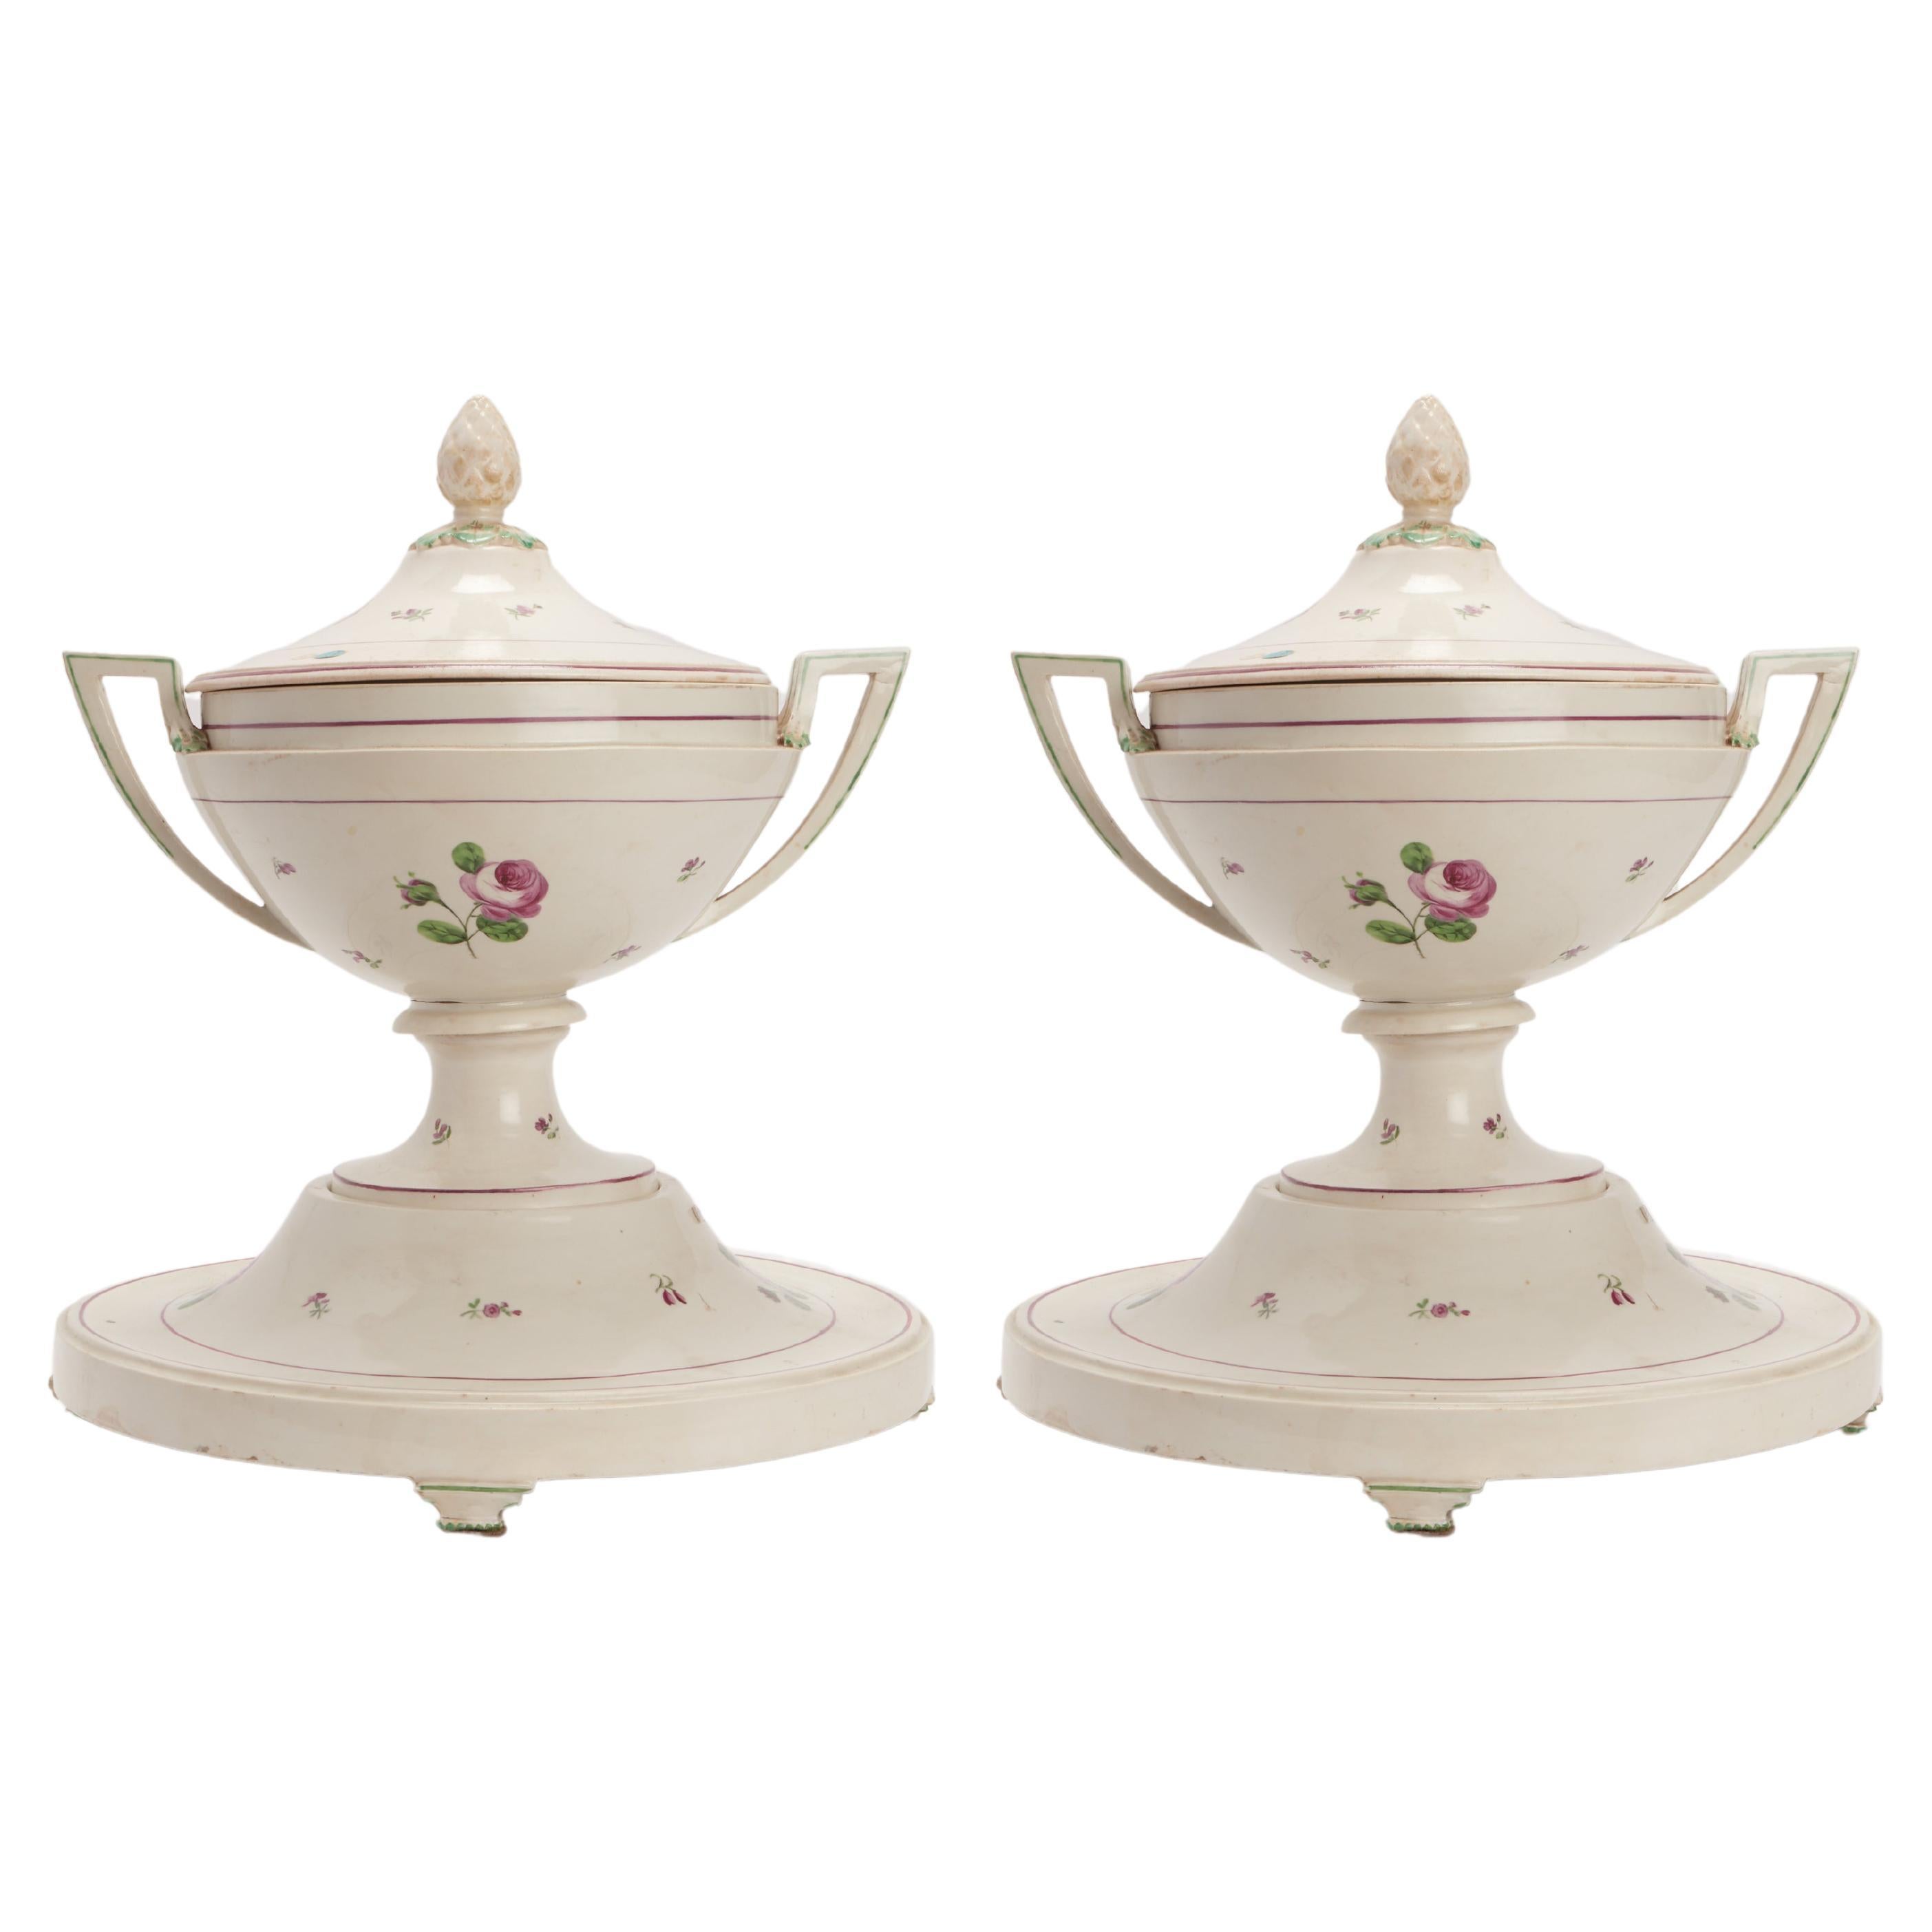 Pair of Soup Terrines Old Vienna Porcelain Manufacture, Austria 1770 For Sale